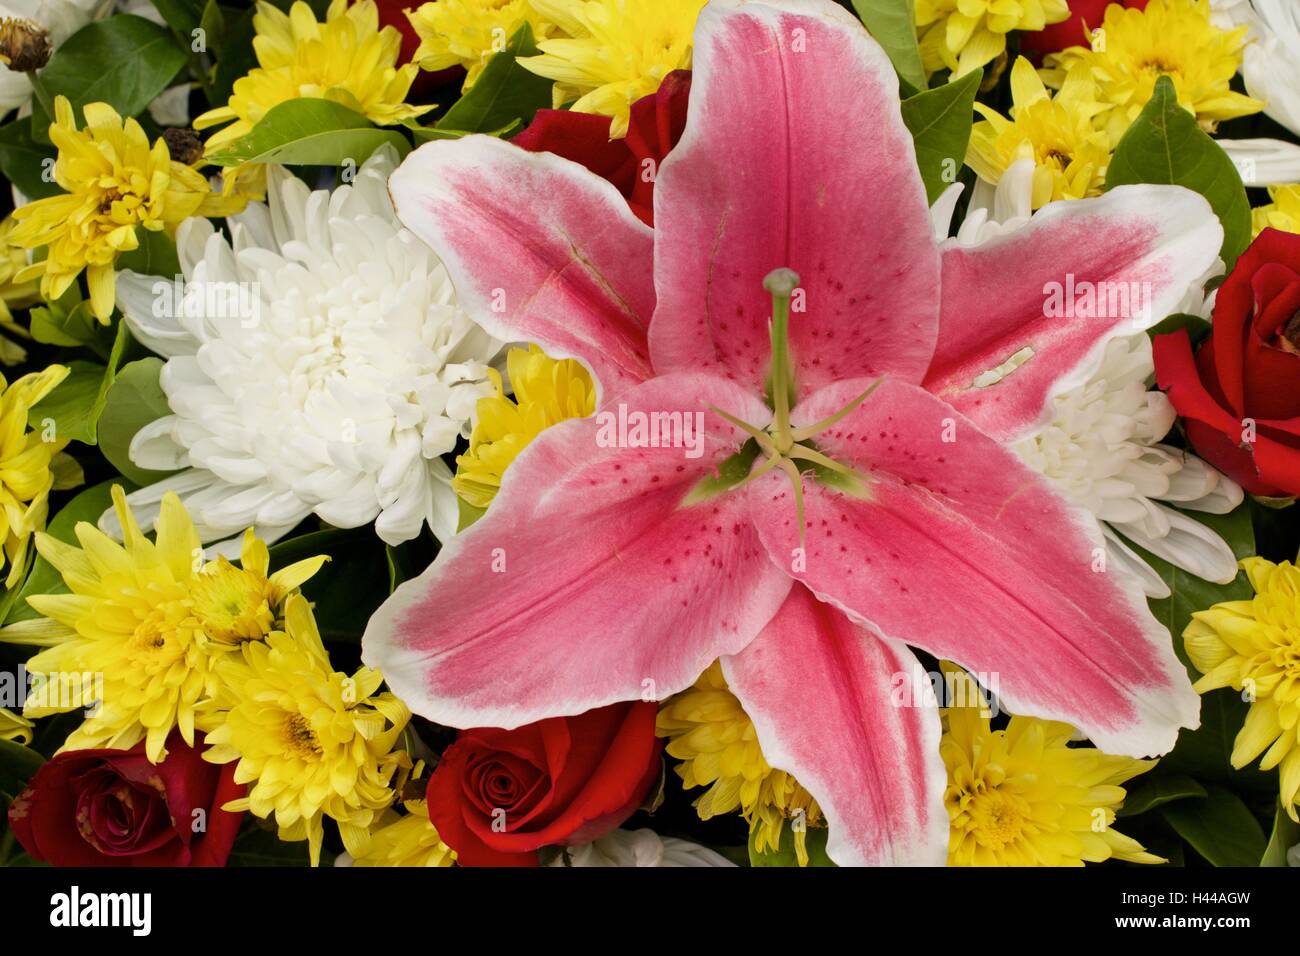 Pink lilly Red roses yellow spider white chrysanthemum mixed flower Stock Photo